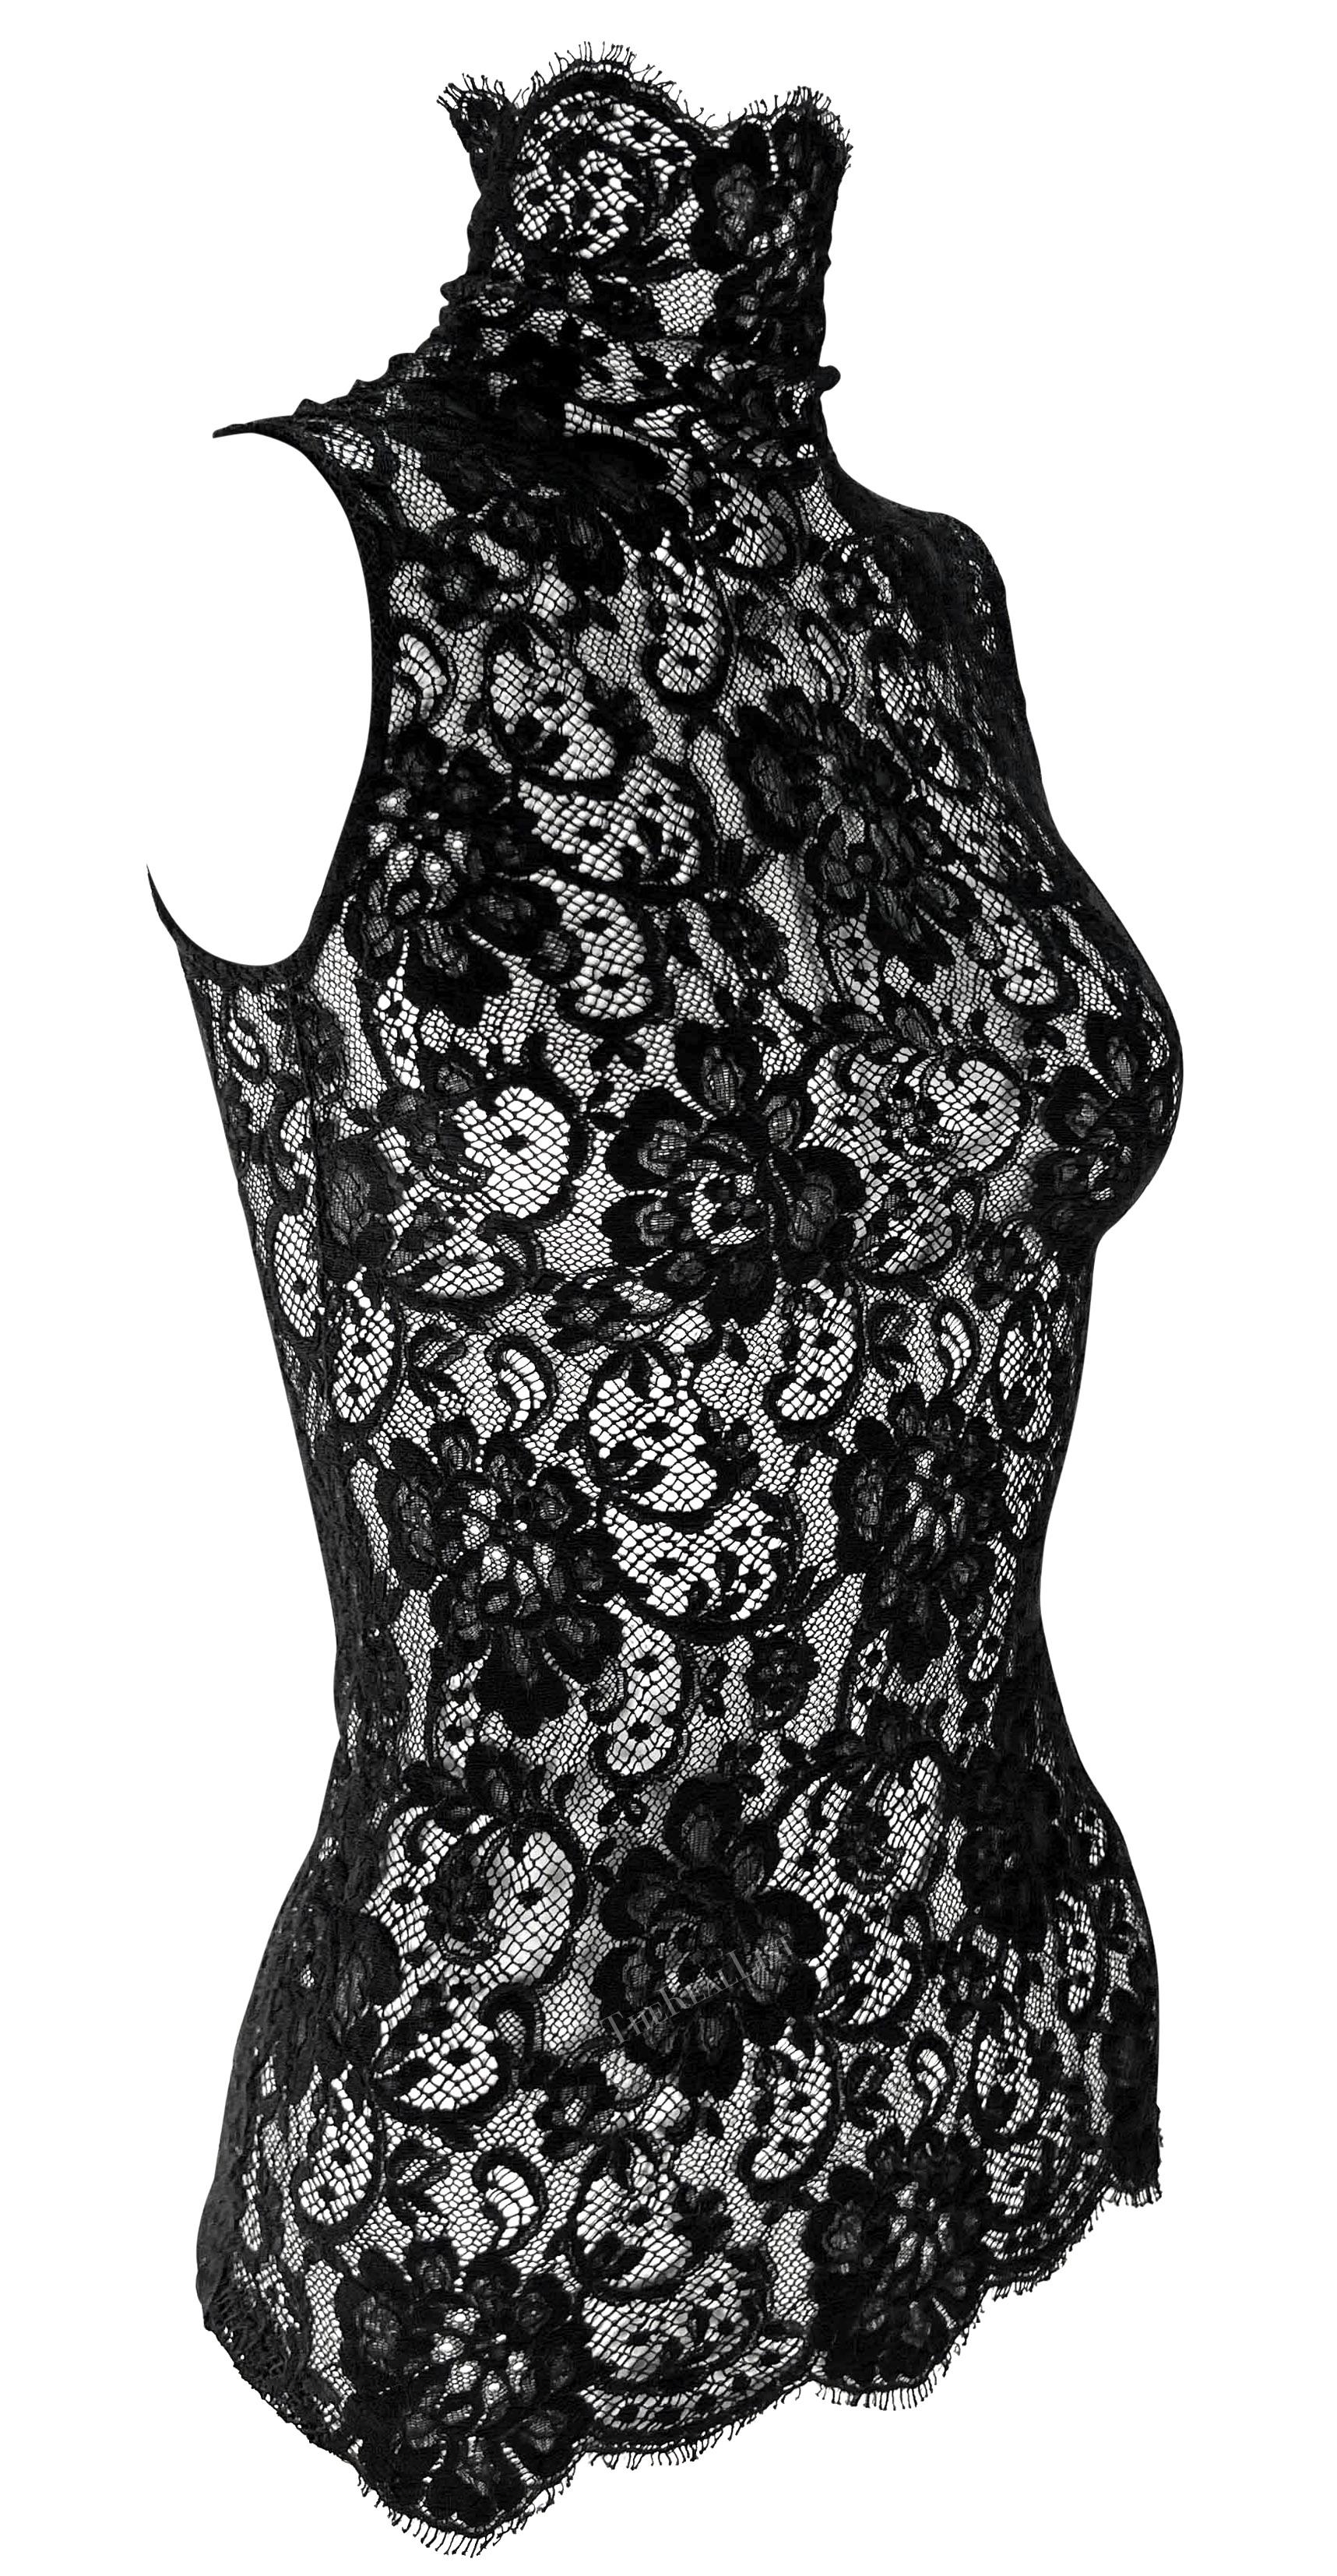 F/W 2002 Dolce & Gabbana Sheer Lace Black Mock Neck Sleeveless Top For Sale 3